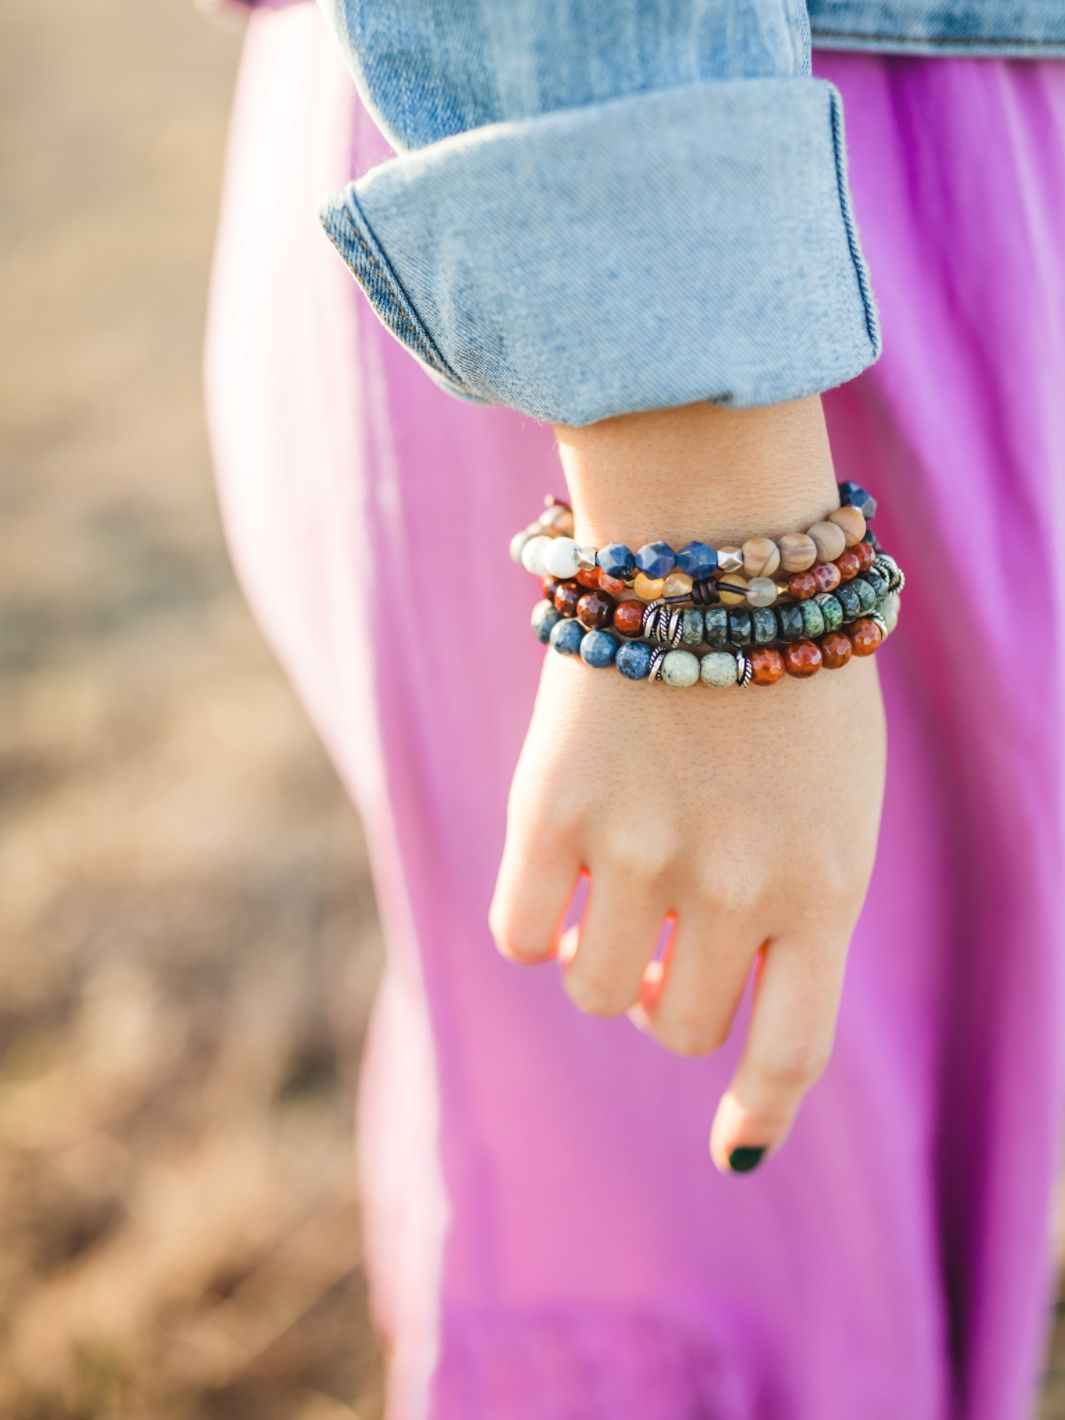 woman's wrist with multiple colorful bracelets on